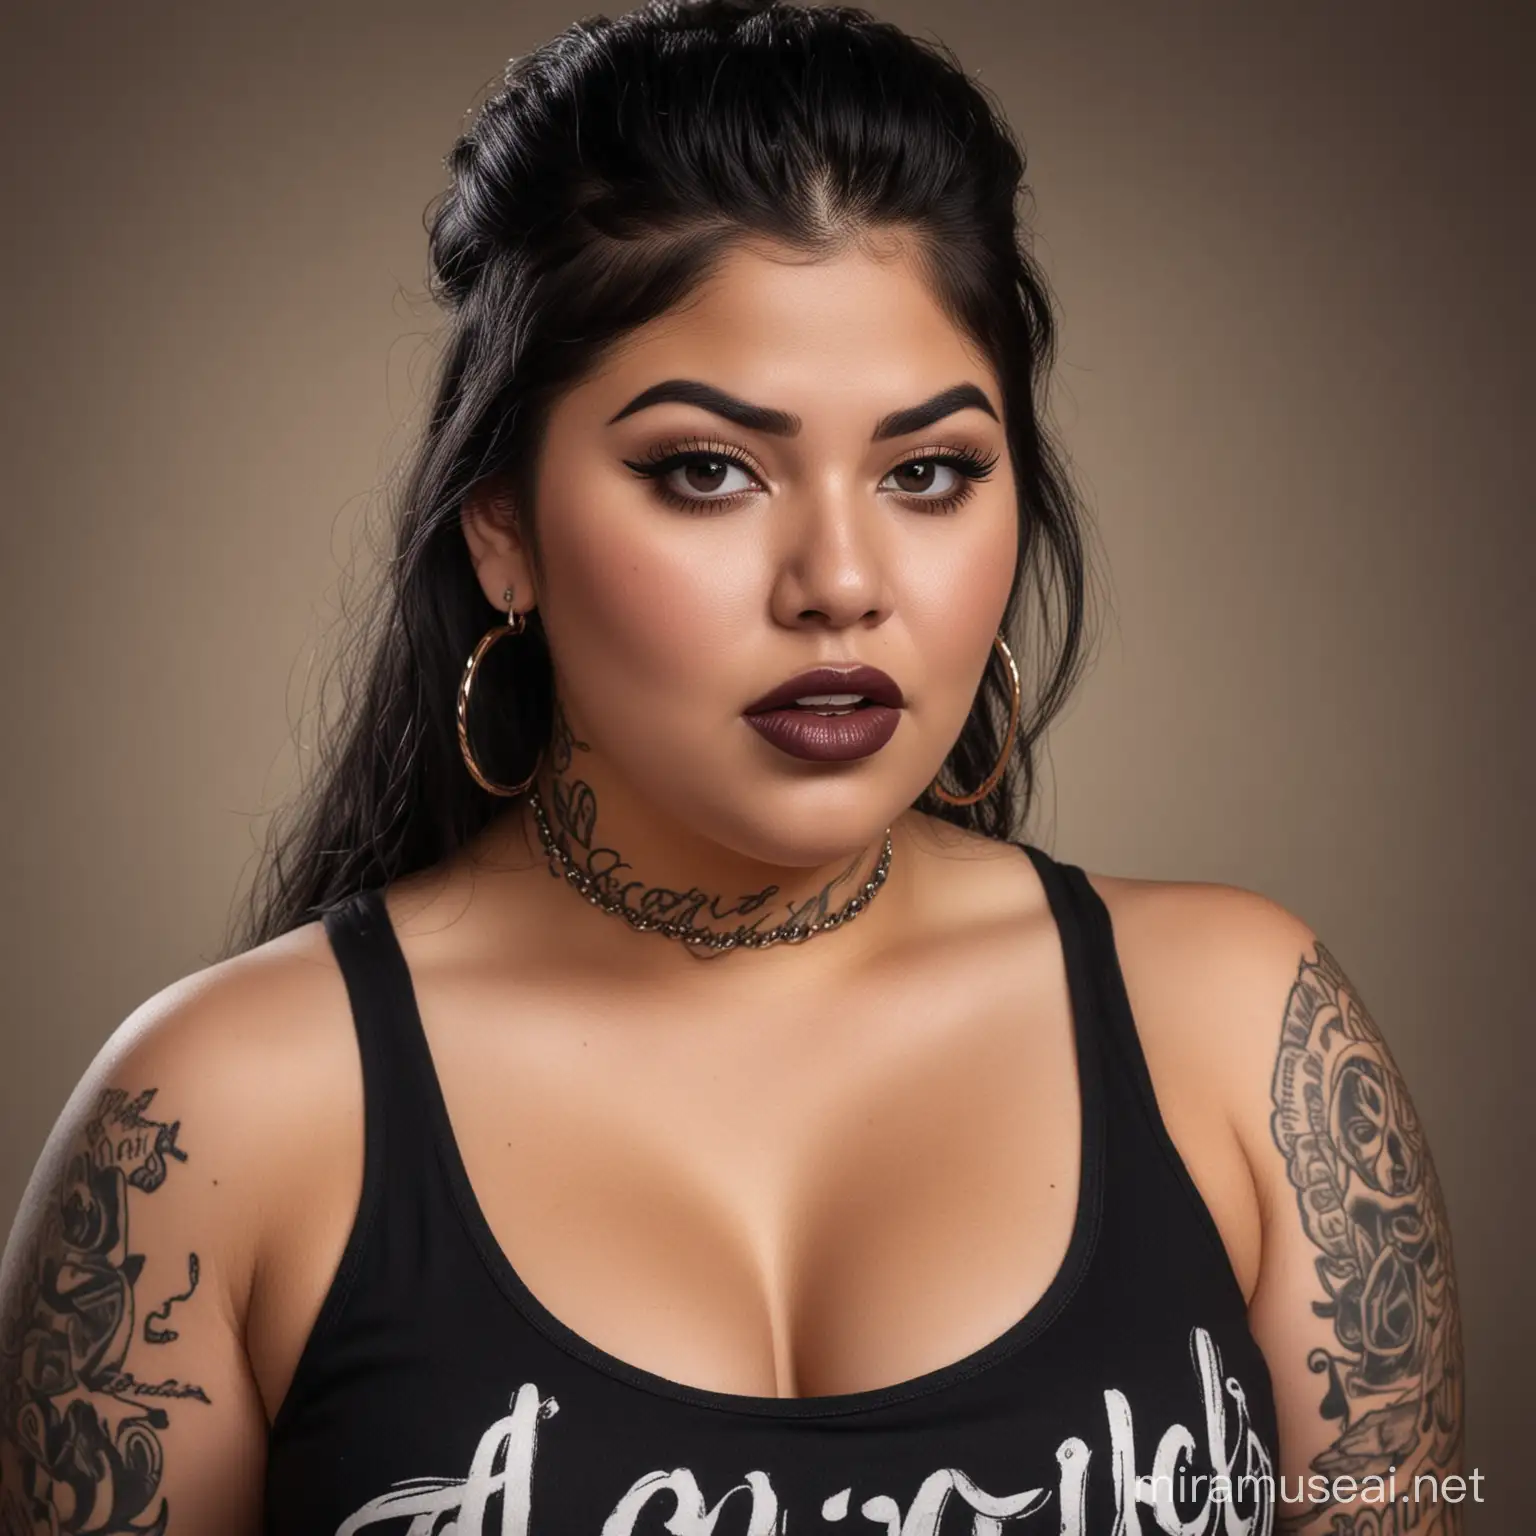 Confident Chola Woman with Black Lipstick and Hoop Earrings